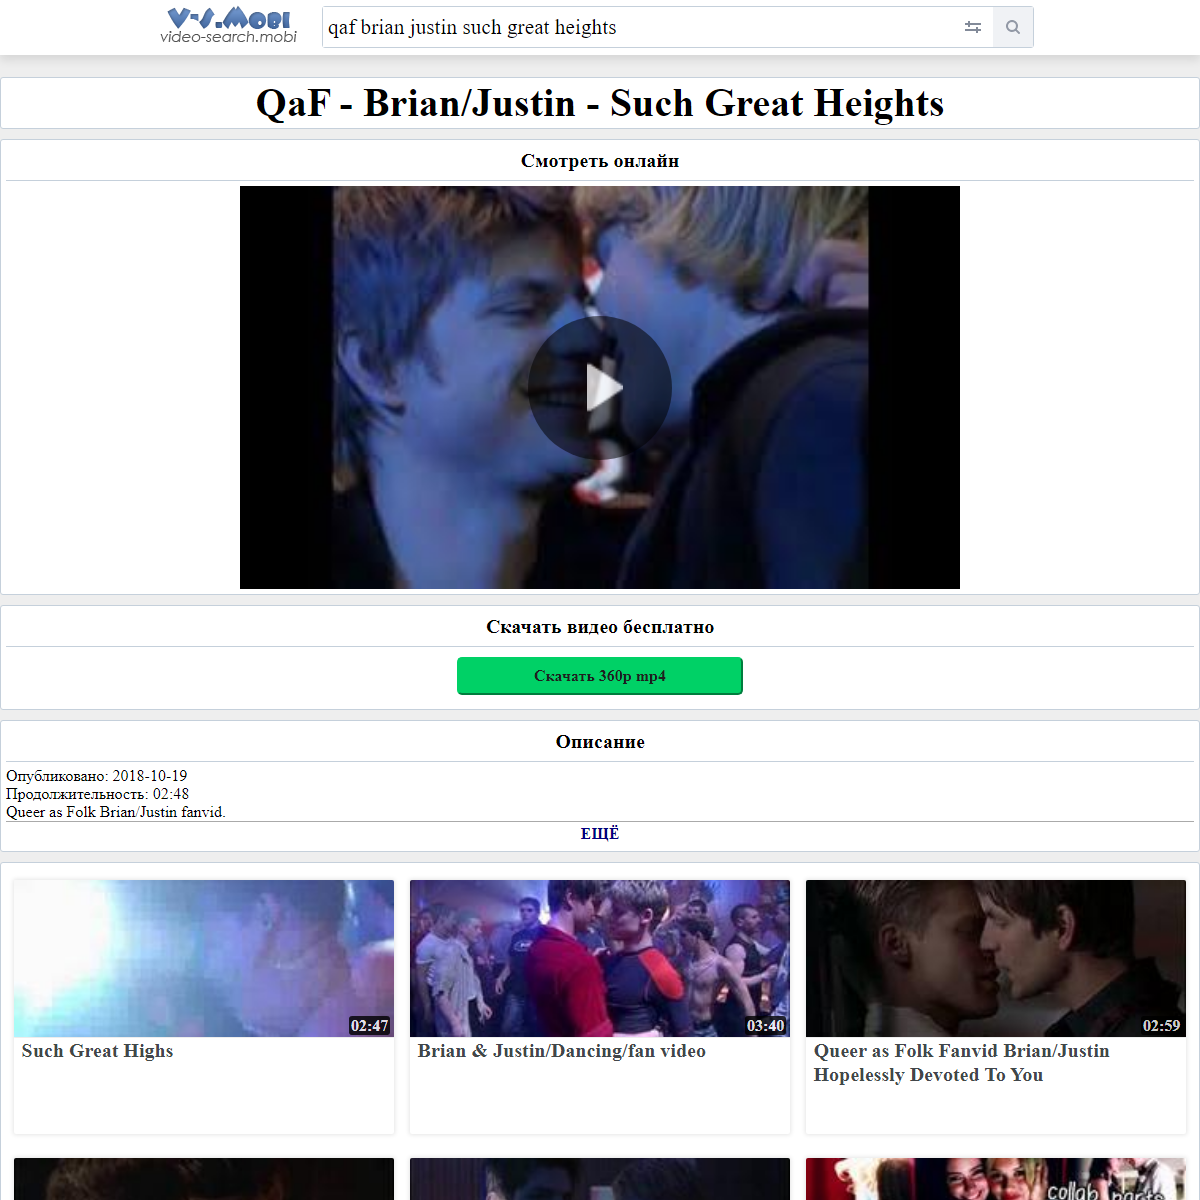 A complete backup of https://v-s.mobi/qaf-brian-justin-such-great-heights-02:48